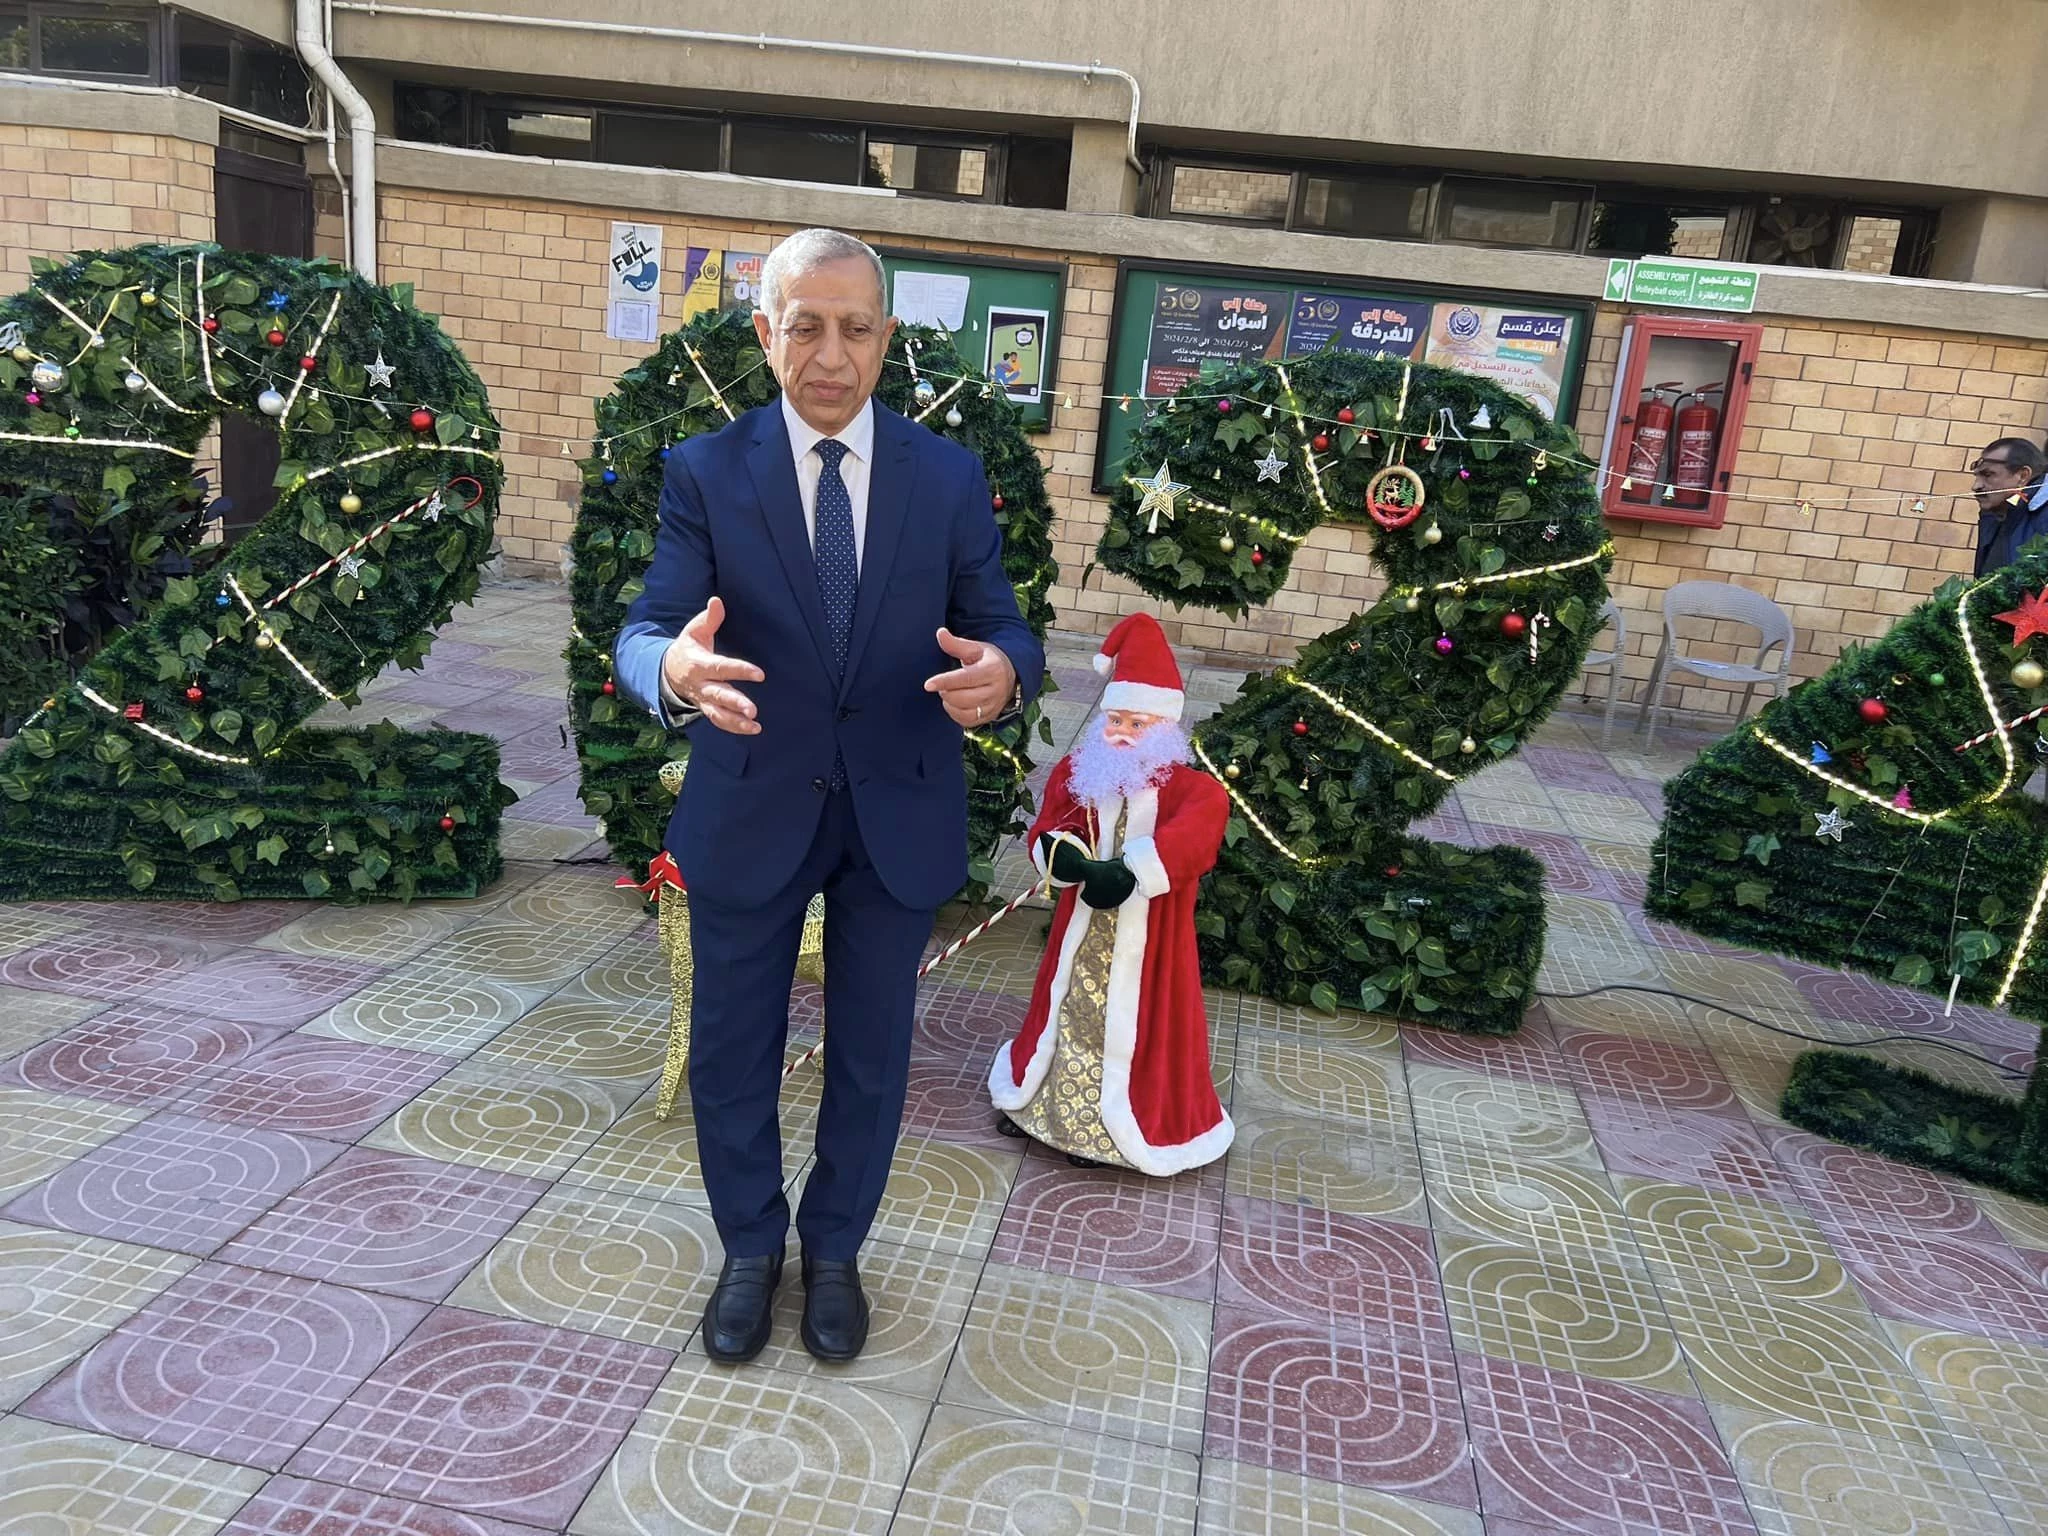 His Excellency Professor Dr., President of the Arab Academy for Science, Technology and Maritime Transport, opened the closing ceremony of activities and the exhibition of fine arts and handicrafts for students of the Faculties of Management, Technology, Language and Media in Miami on: 1/4/20245